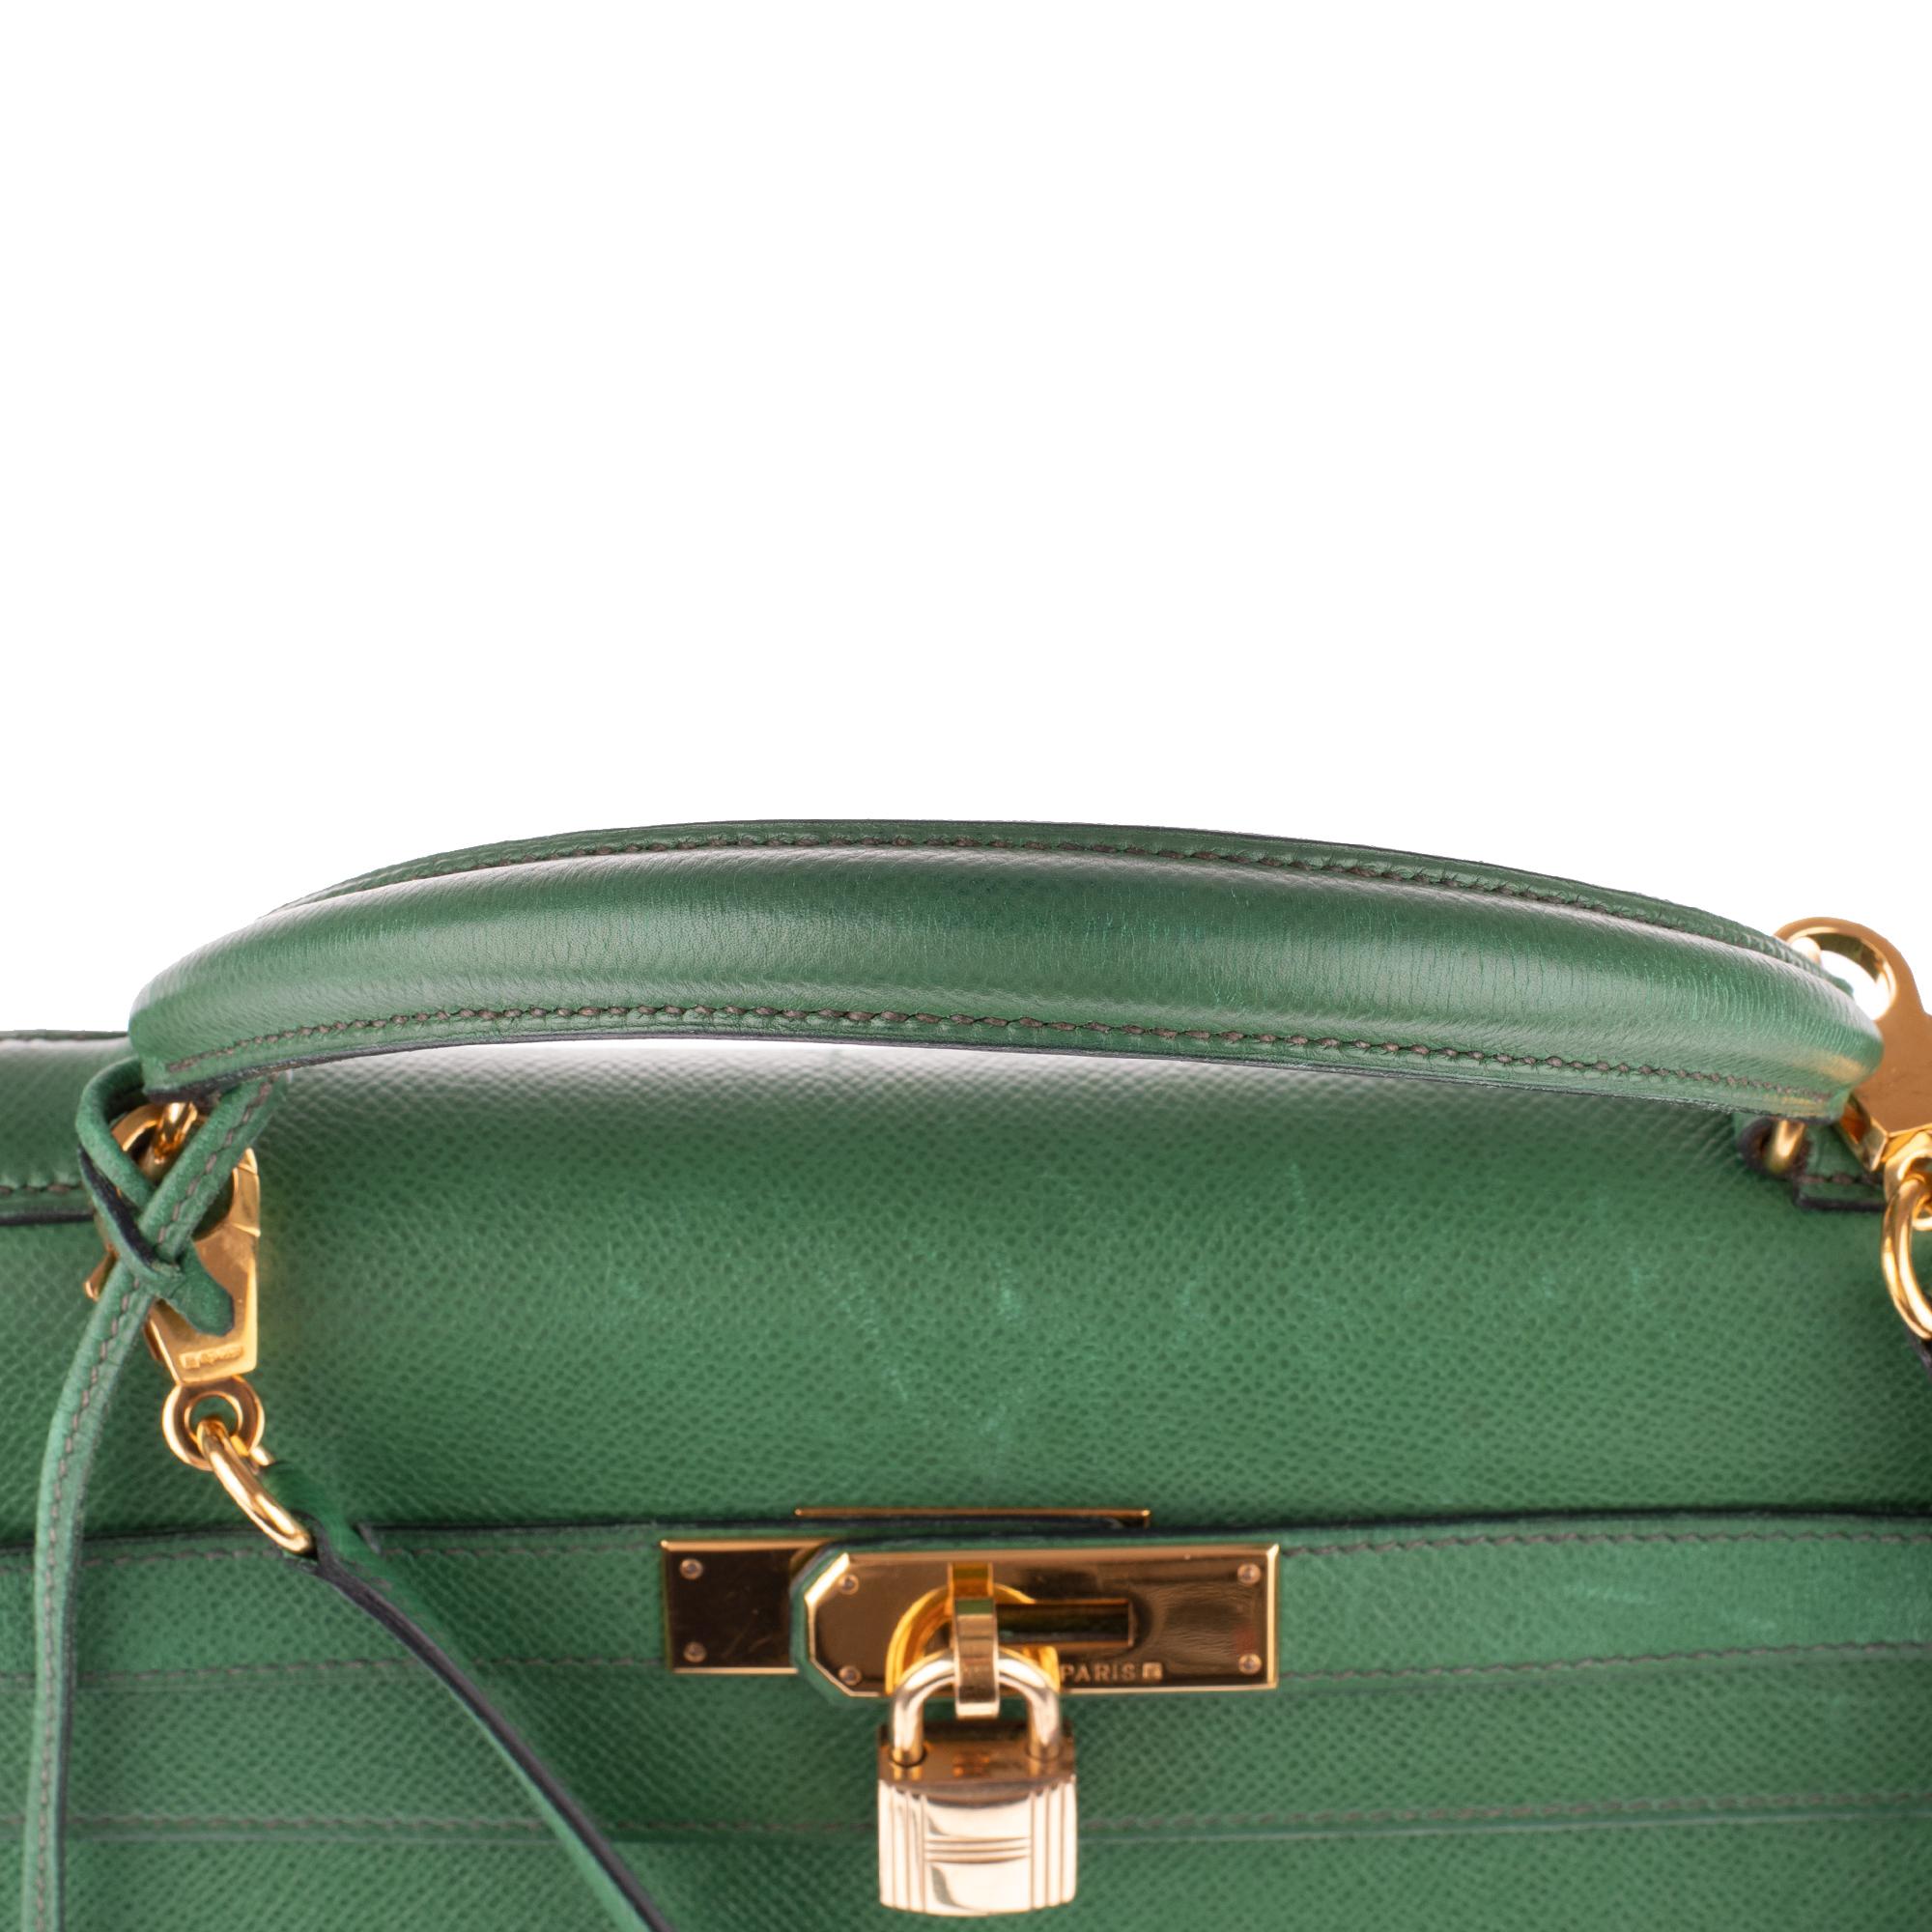 Amazing handbag Hermès Kelly 32 sellier with strap in green courchevel leather ! 2